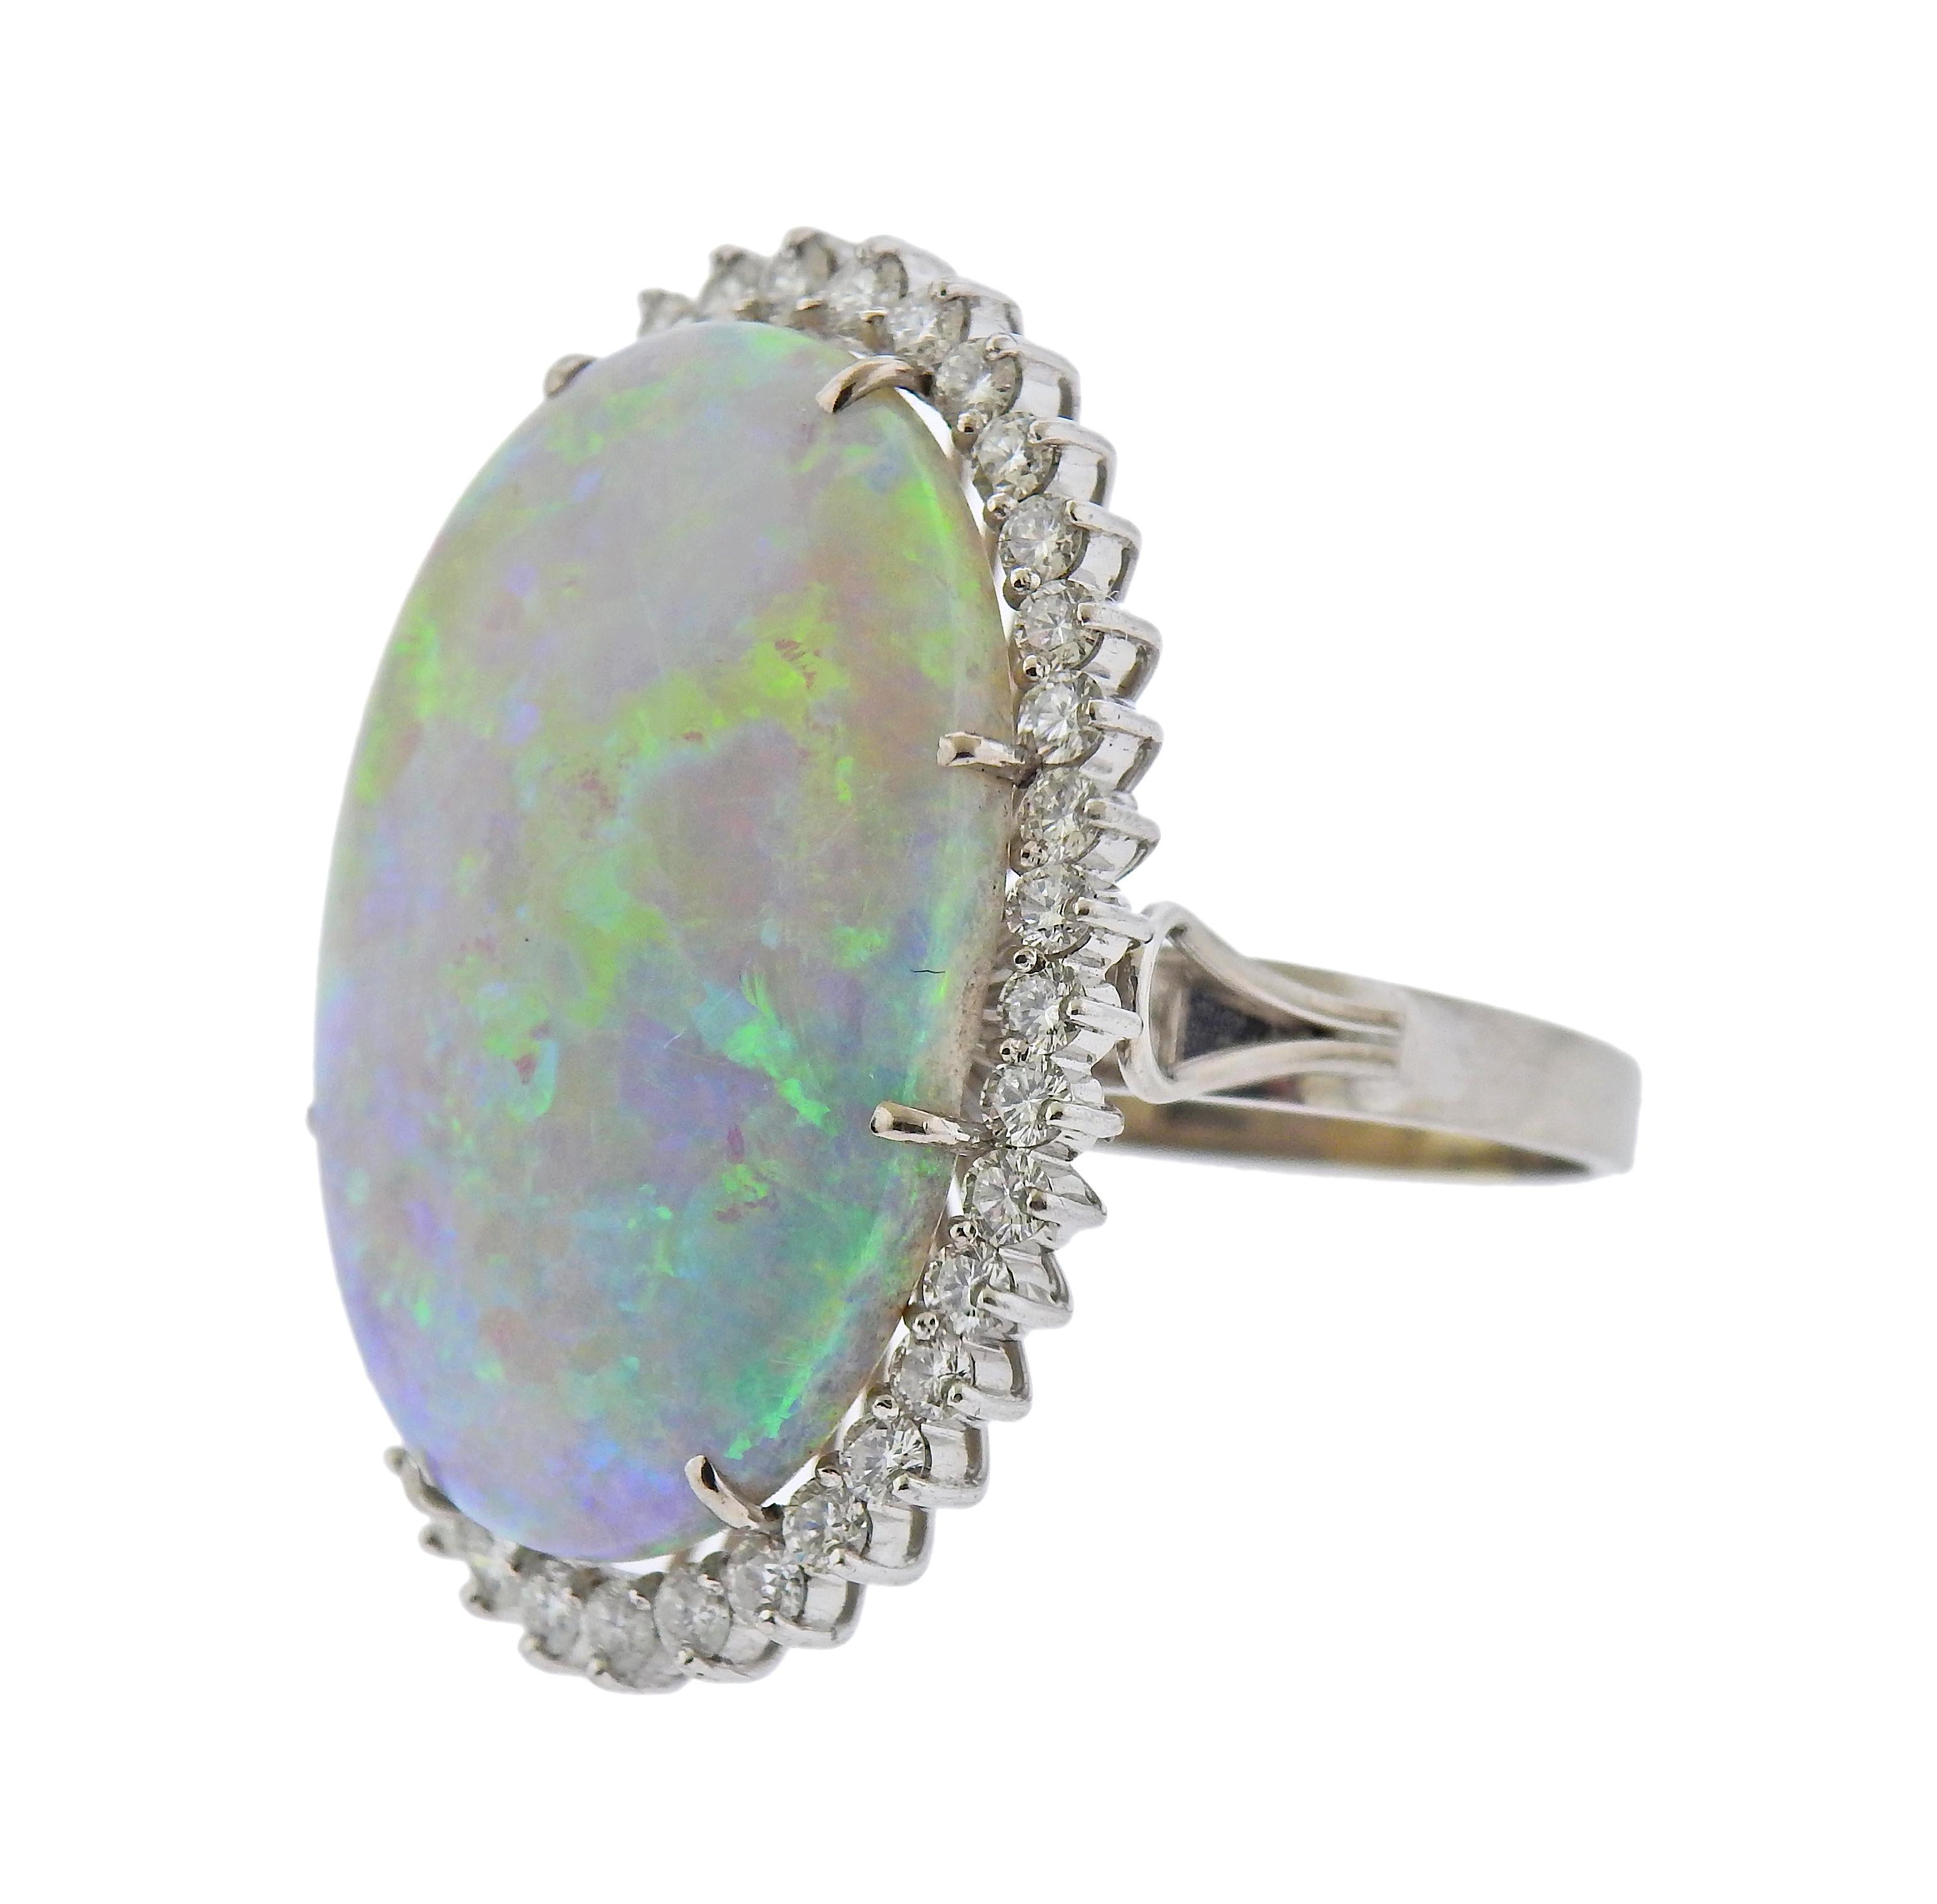 18k gold cocktail ring with oval opal, measuring 29.5 x 20.3mm, surrounded with approx. 1.20ctw in diamonds. Ring size - 9.5, ring top - 35mm x 25mm. Marked 18k. Weight - 14 grams. 